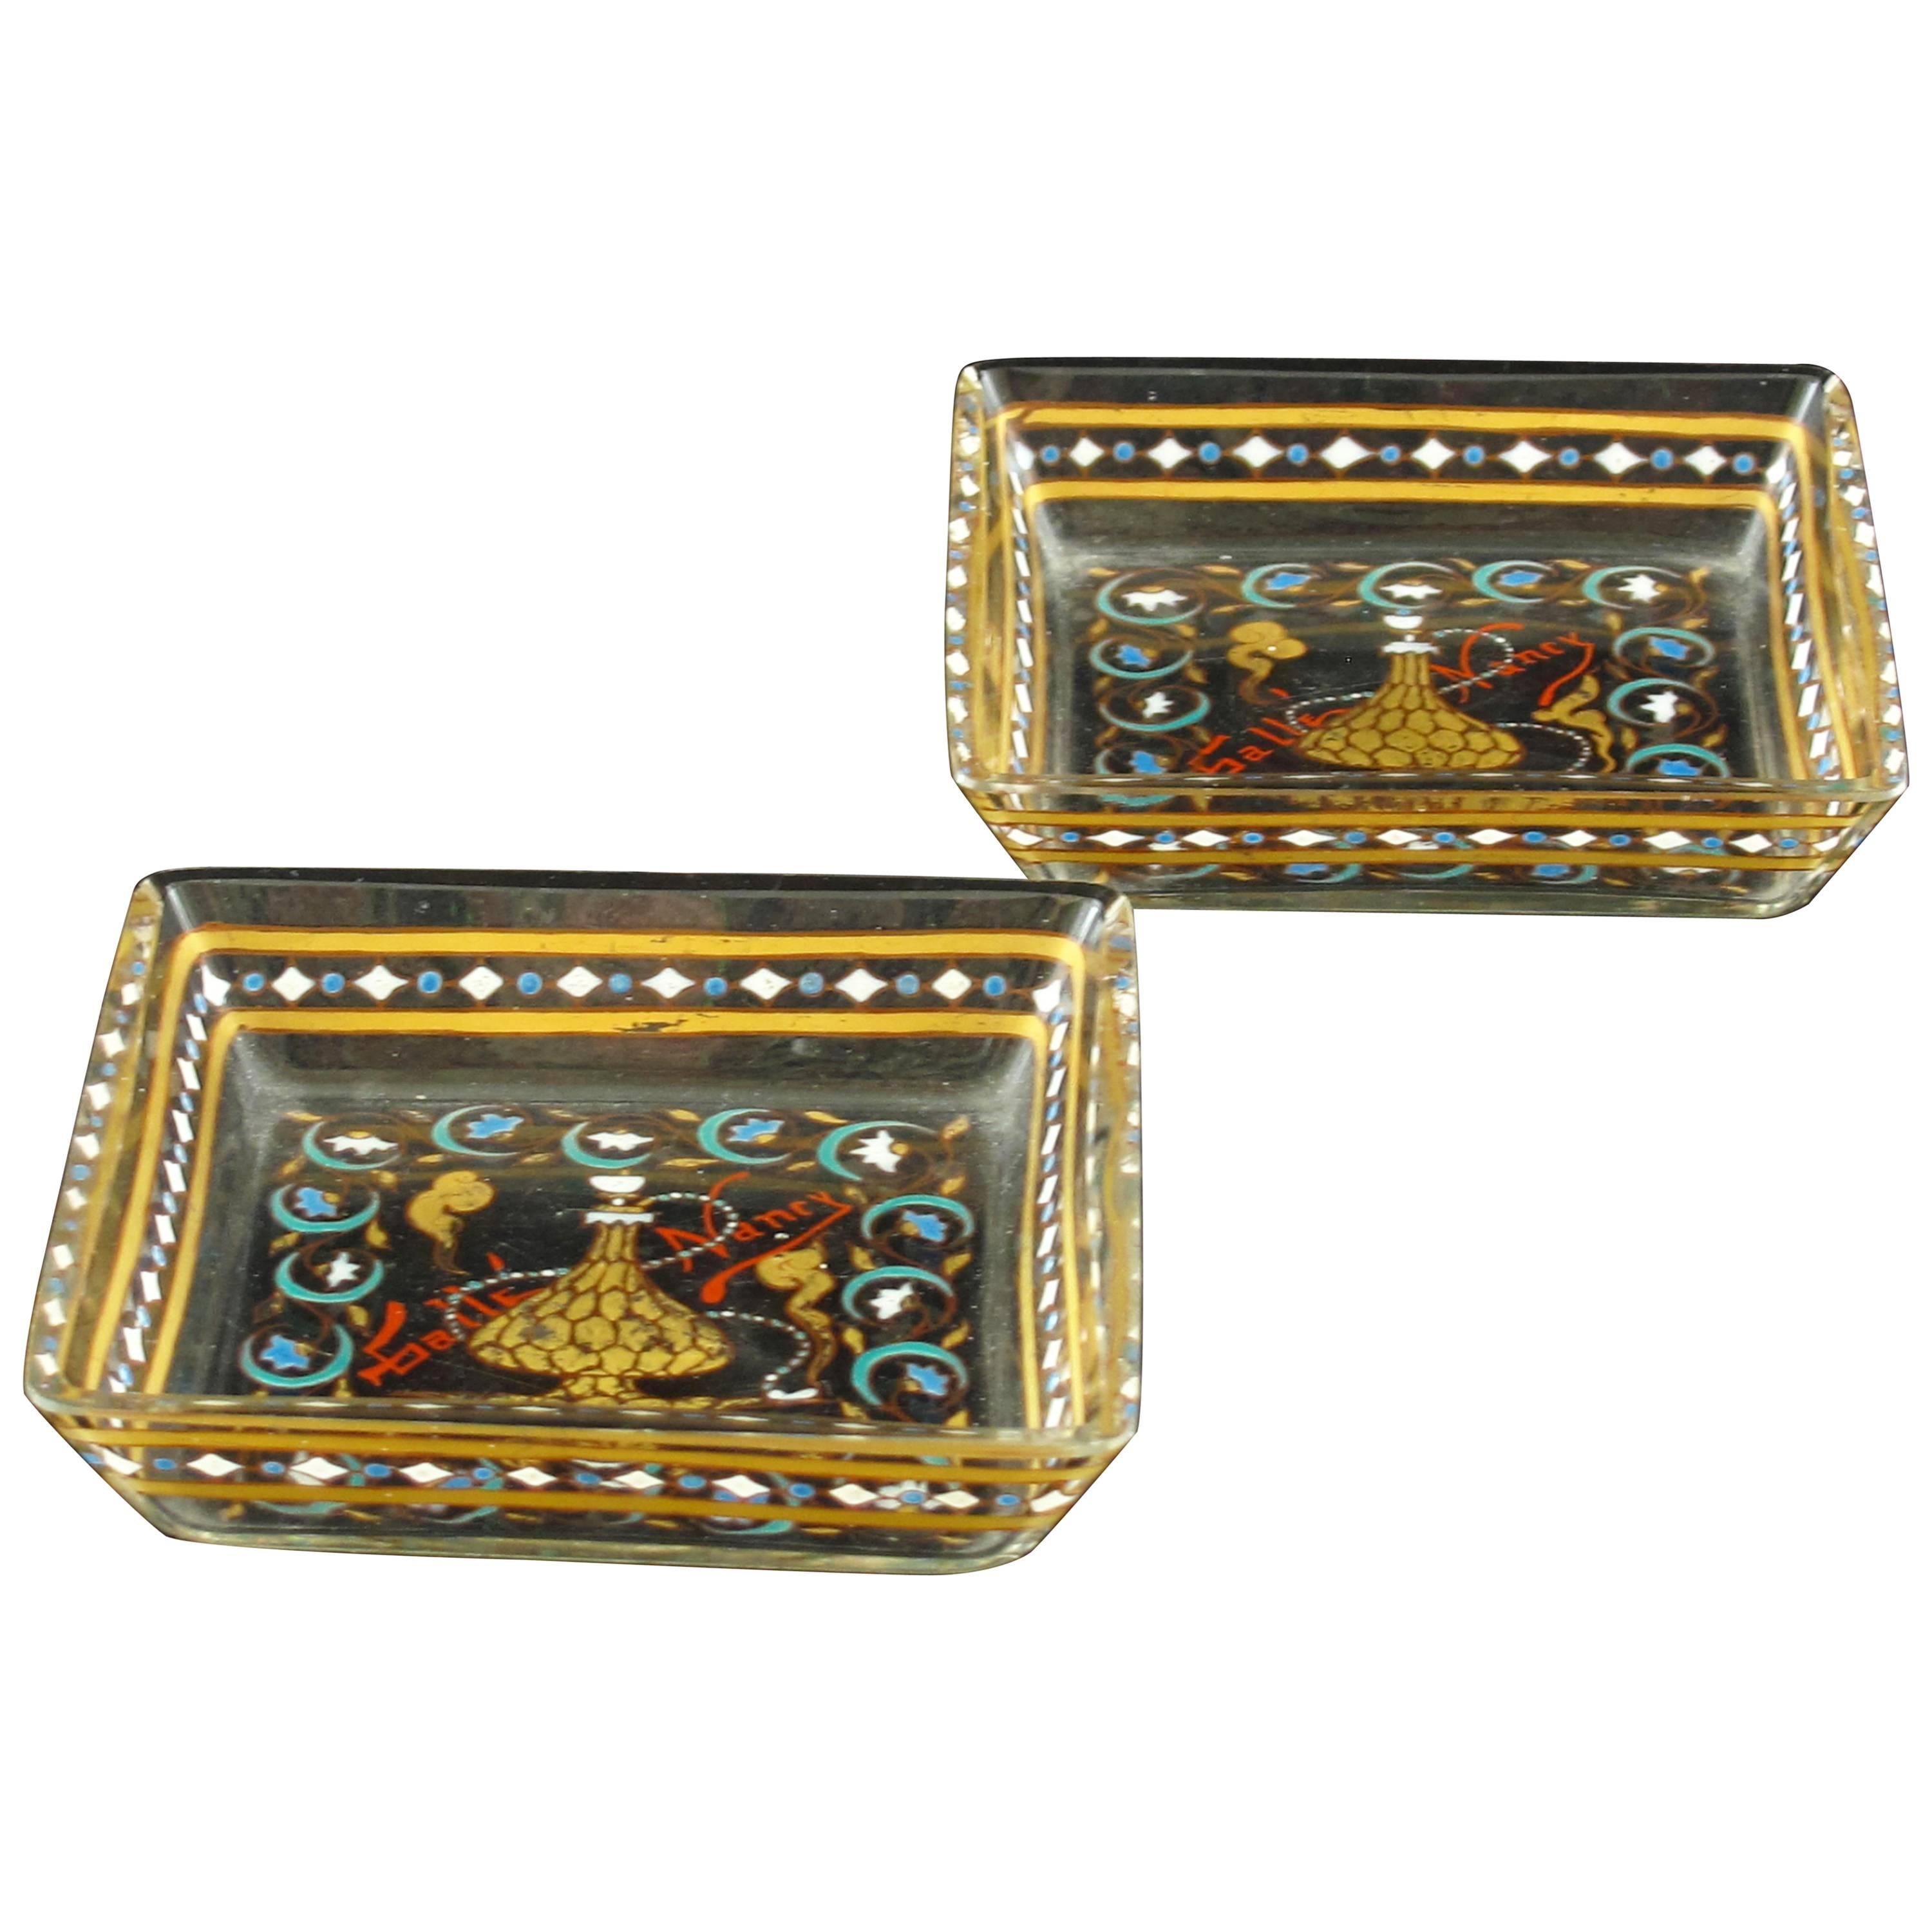 Art Nouveau Pair of Emile Galle Pin Trays in the Islamic Style For Sale